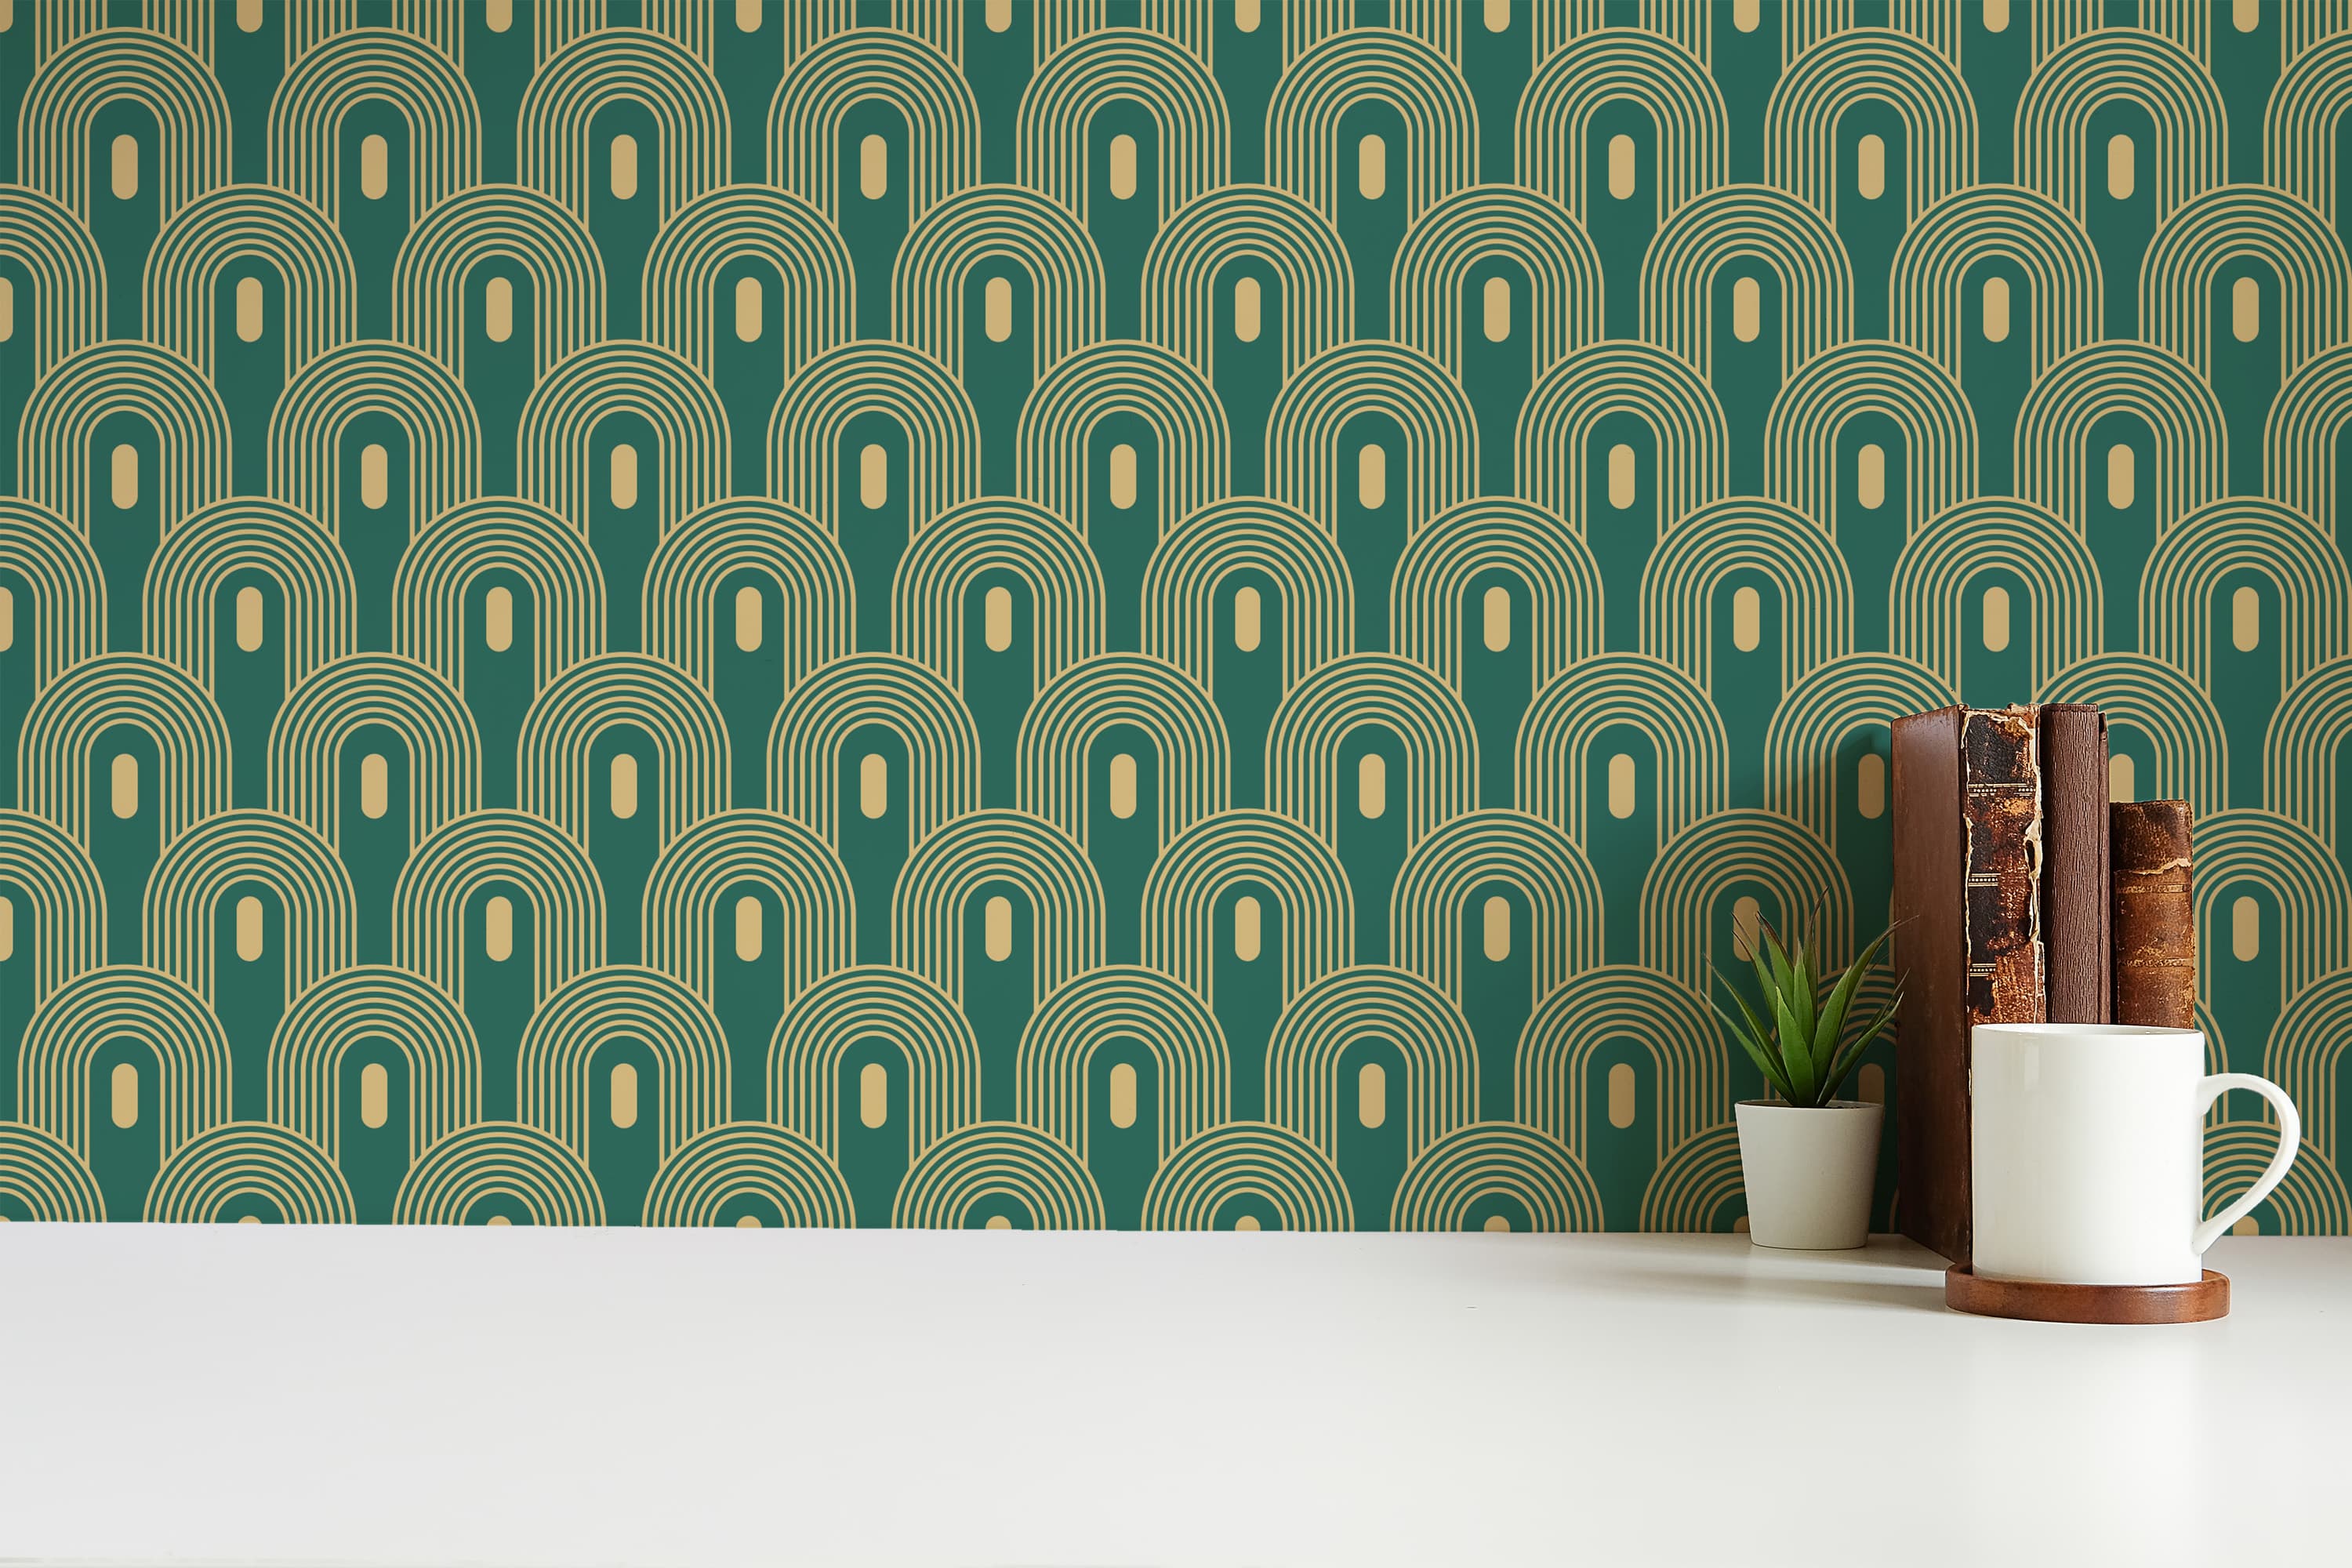 Green Art Deco wallpaper - Peel and Stick or Traditional